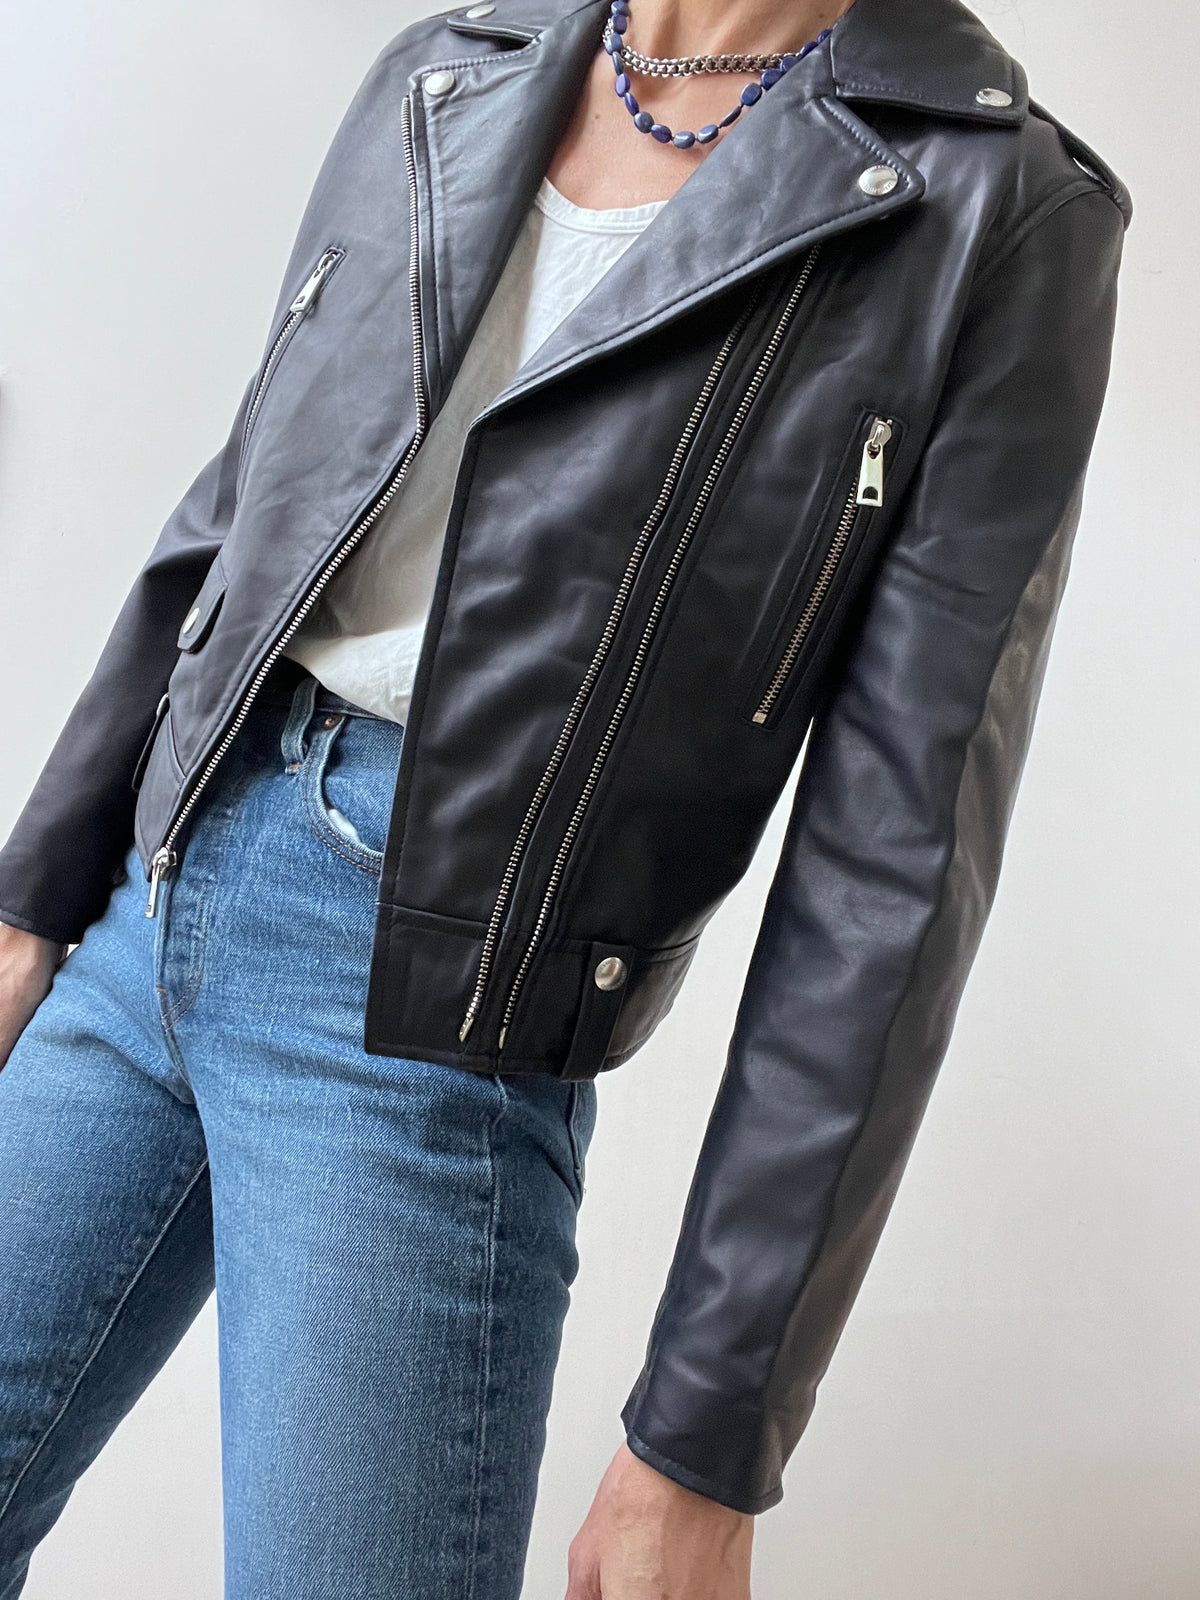 Zadig & Voltaire Classic Leather Jacket Navy | Jetsetbohemian